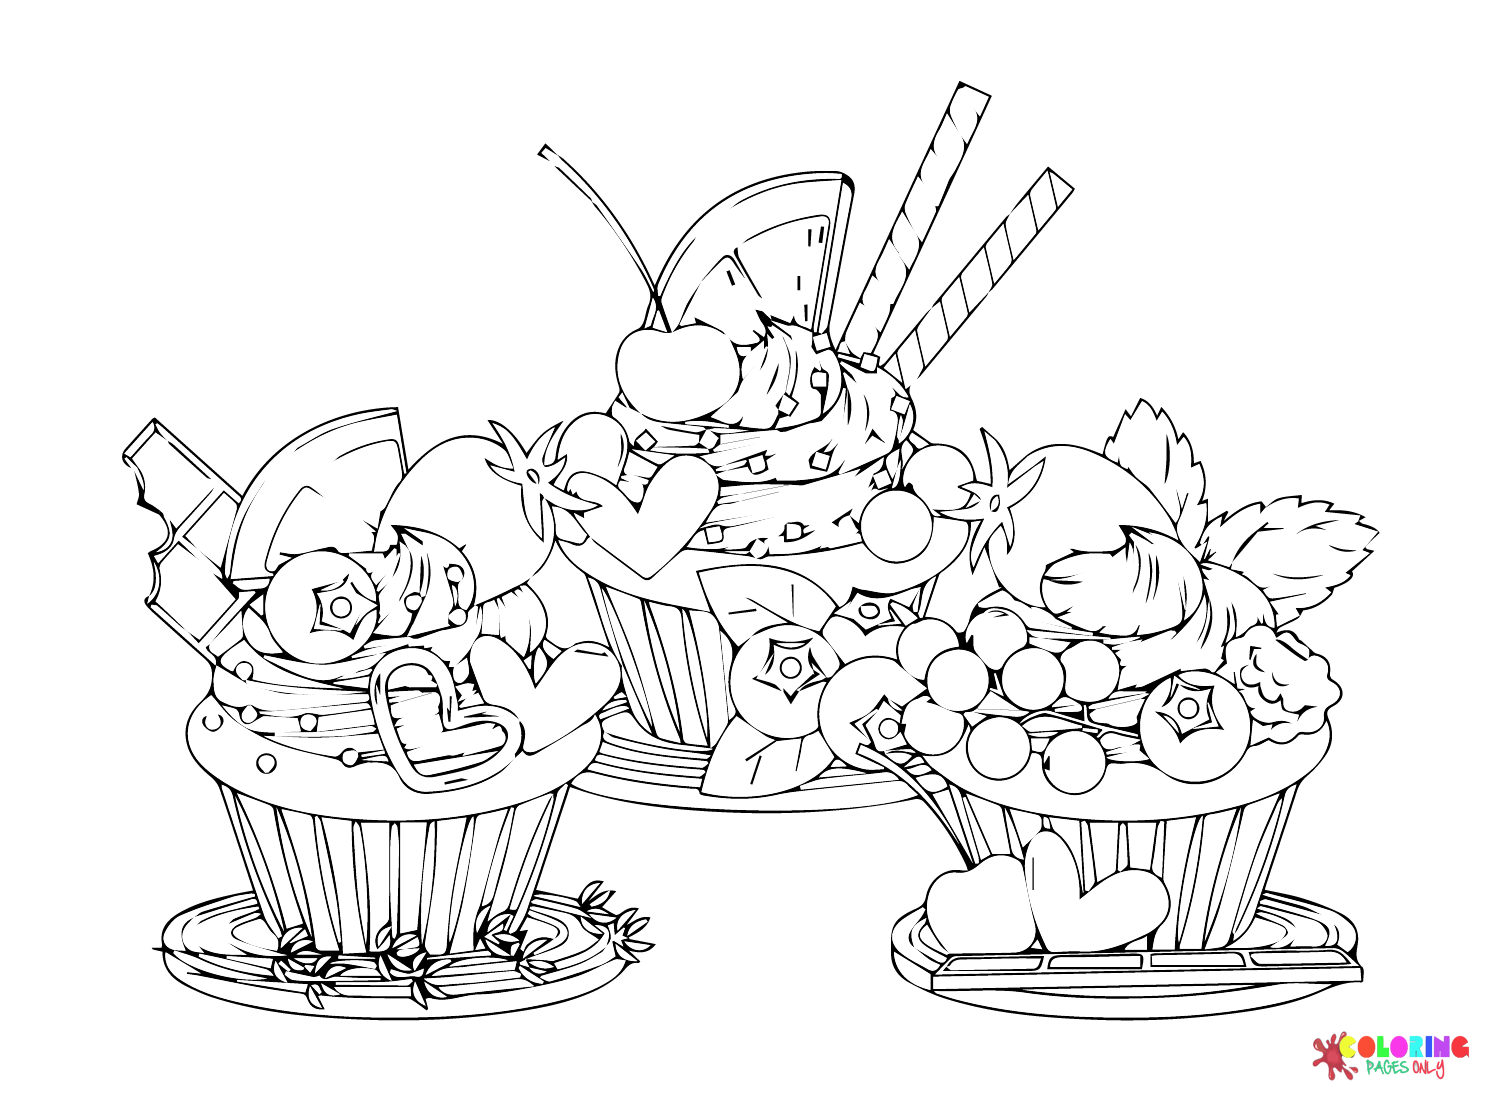 Blueberry Cake Coloring Page